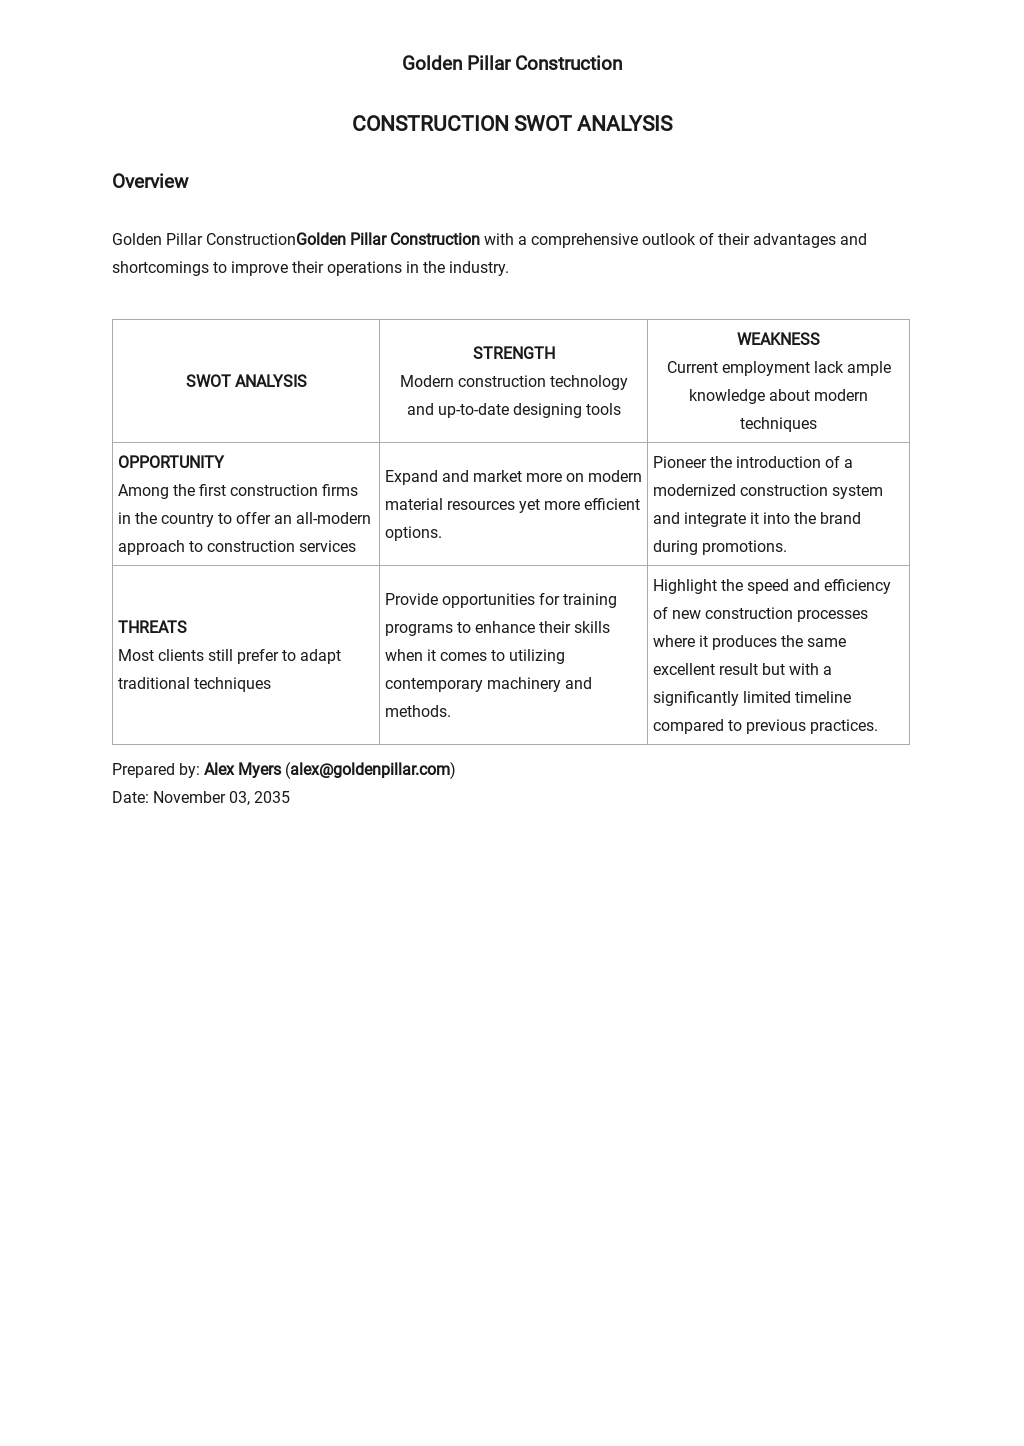 One Page Construction Swot Analysis Template.jpe